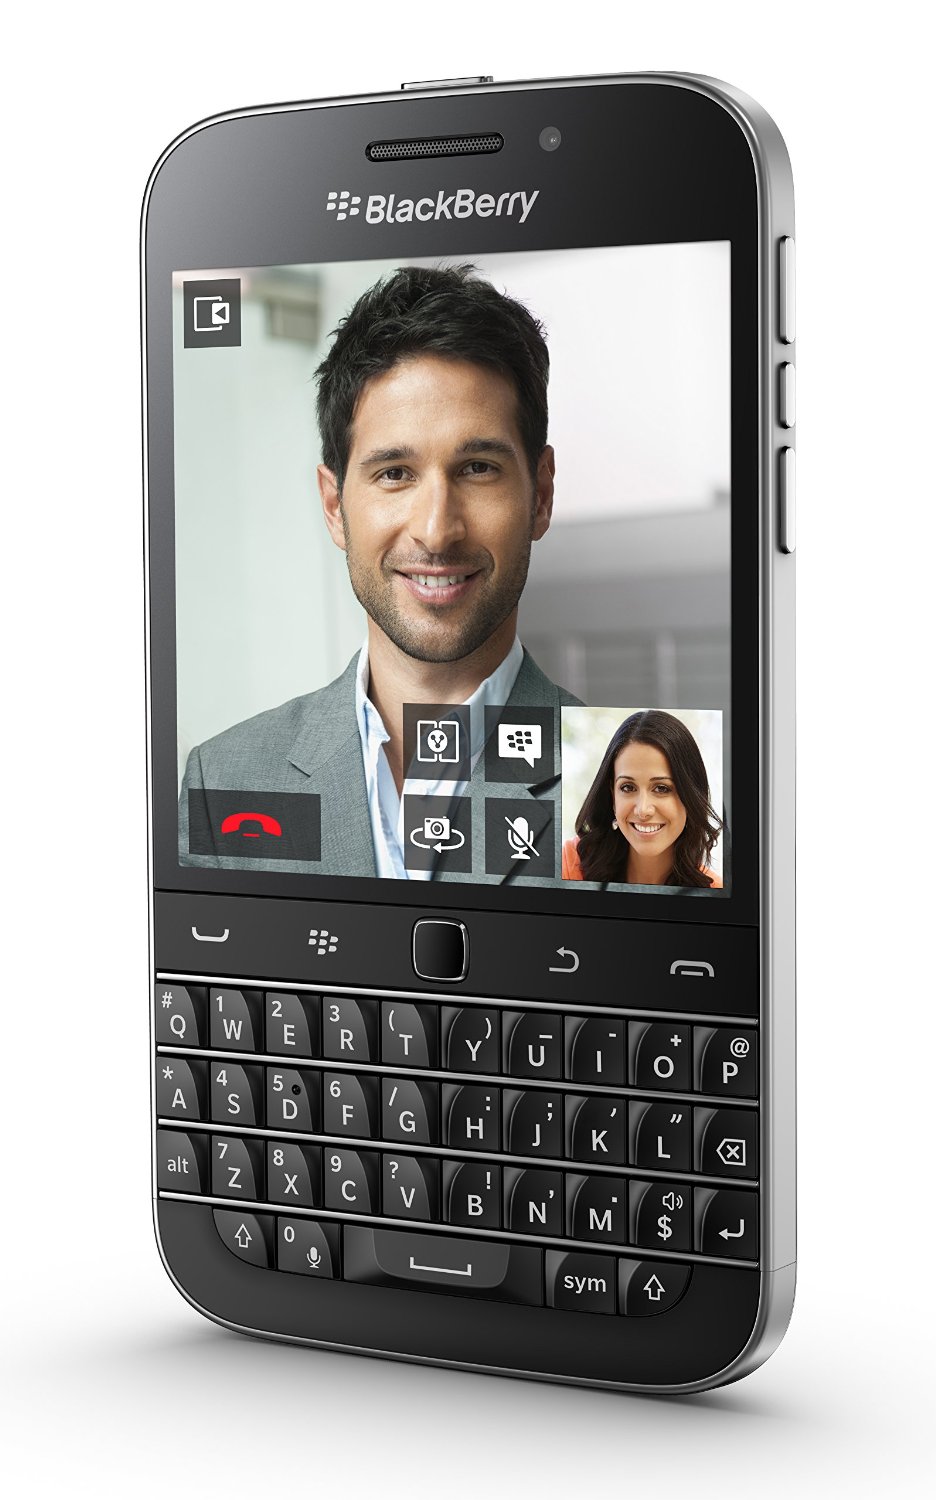 BlackBerry Goes Back to Its Roots, Unveils the BlackBerry Classic